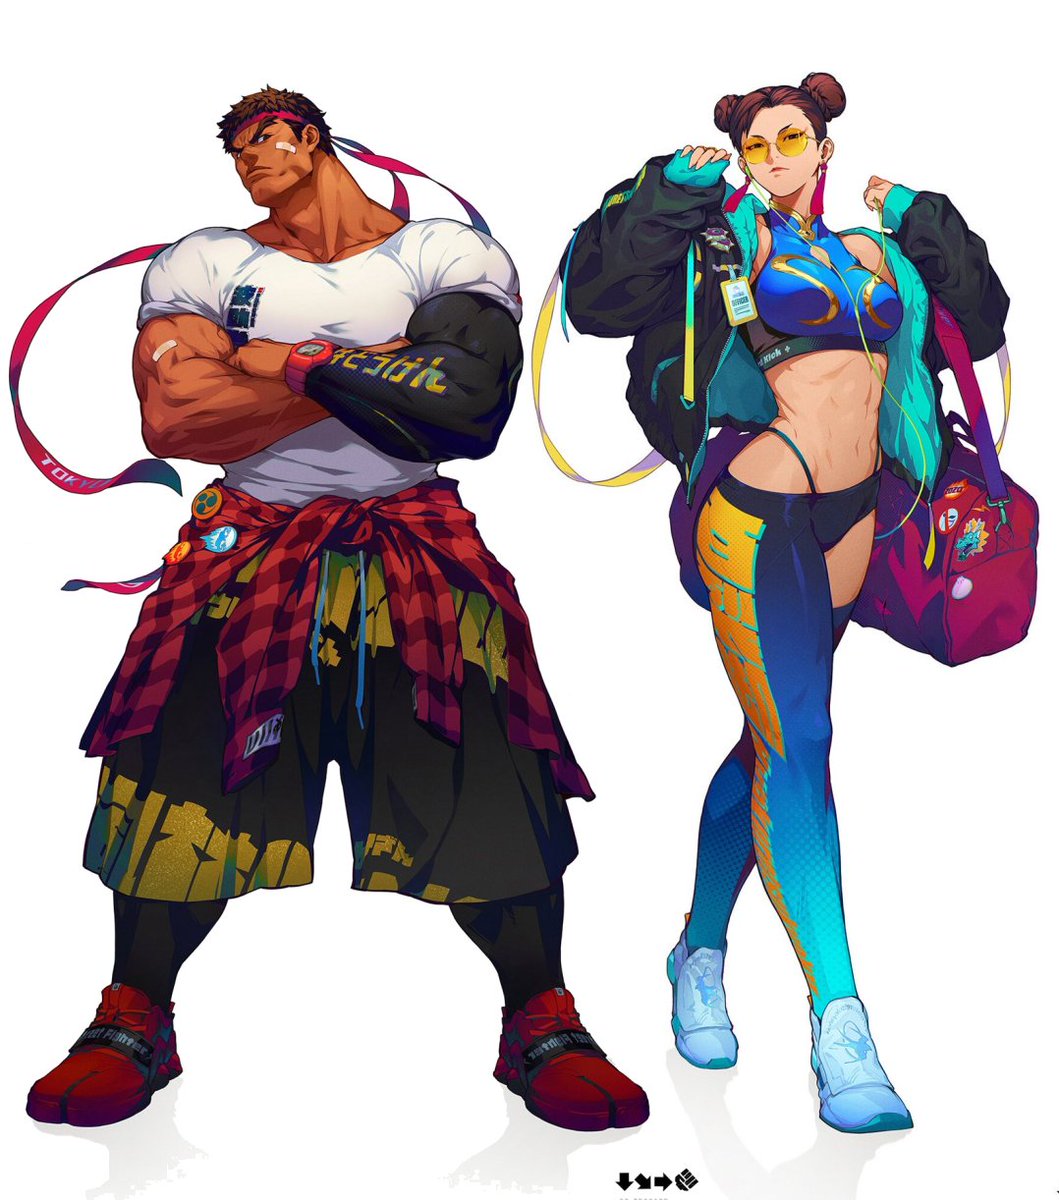 Until they do costumes based on the character art for Street Fighter: Duel....